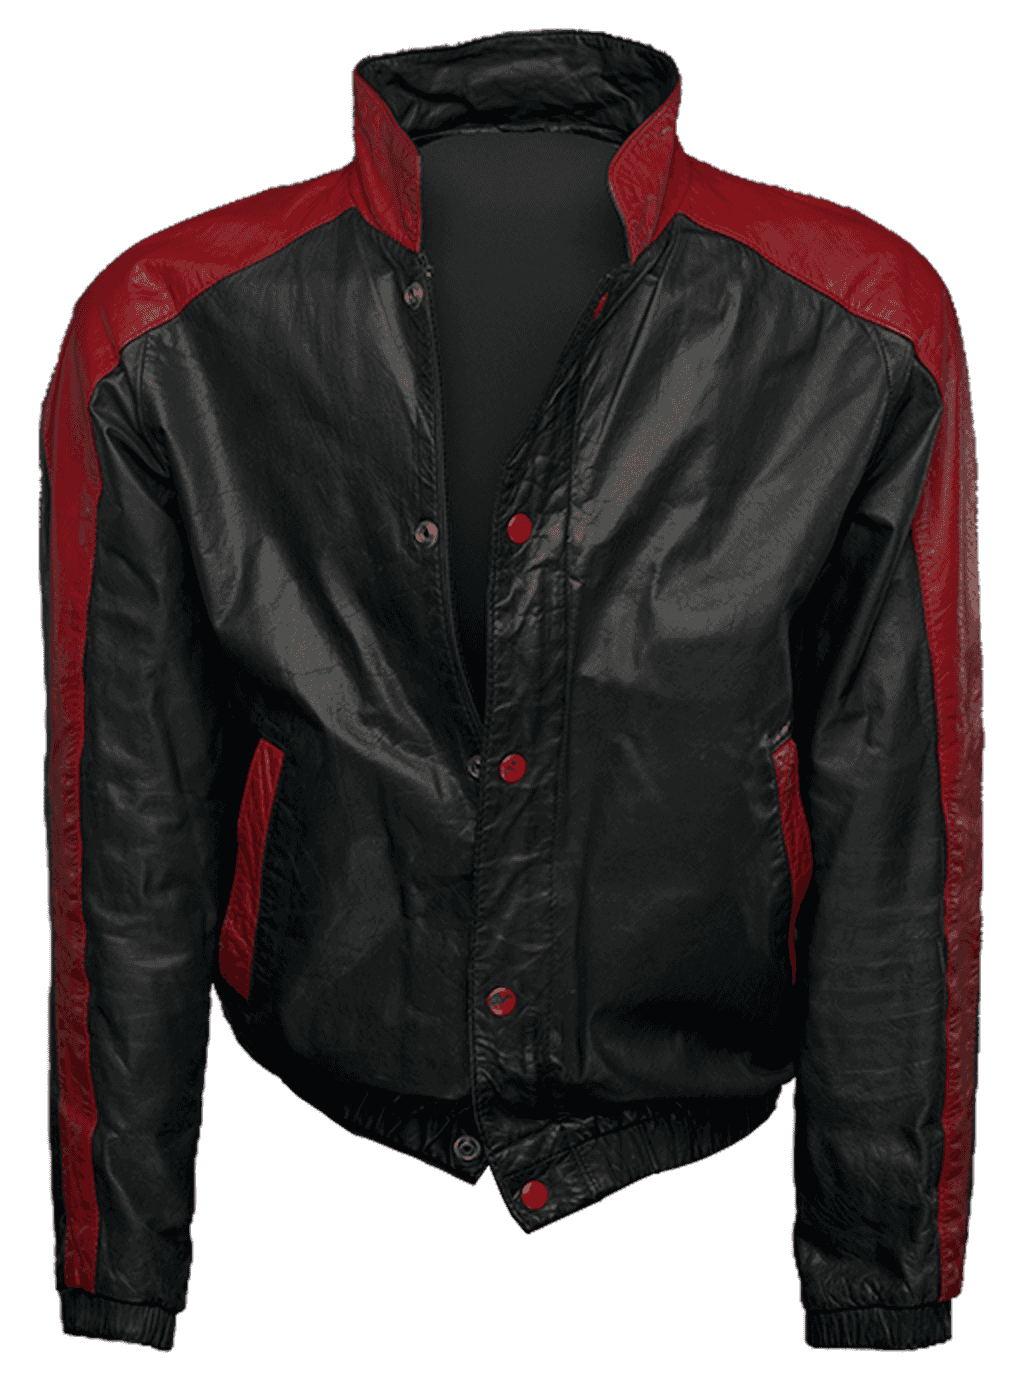 Black and red leather jacket on a mannequin